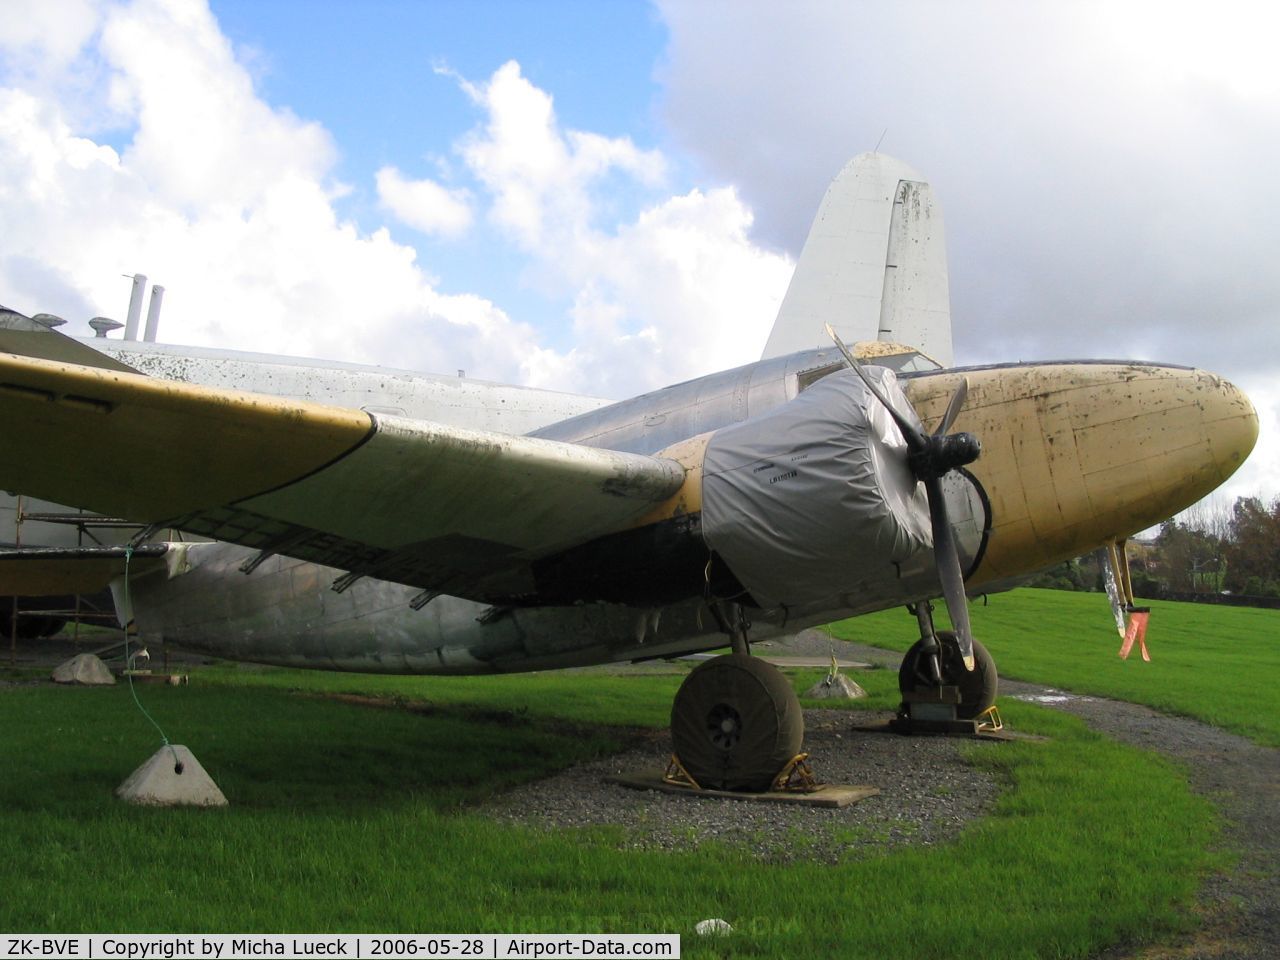 ZK-BVE, Lockheed 18-56 Lodestar C/N 2020, (c/n 2020), Lockheed L-18 Loadstar. Preserved at the Museum of Transport and Technology (MOTAT) in Auckland, New Zealand